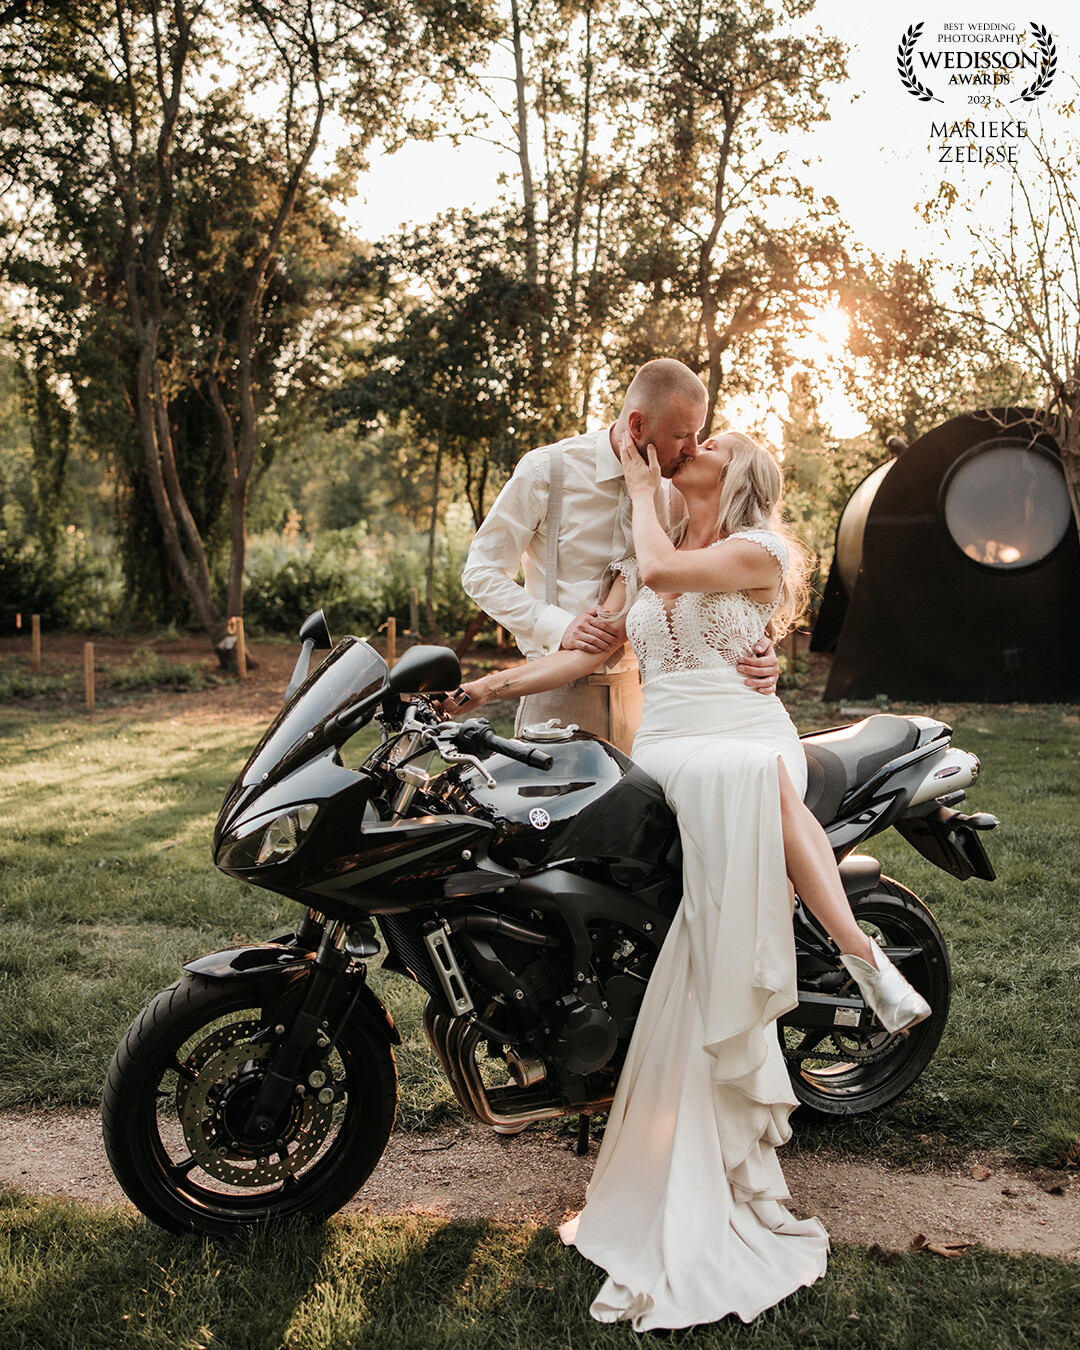 Golden hour, and the bride love to ride a motorbike. Definitly succeed!